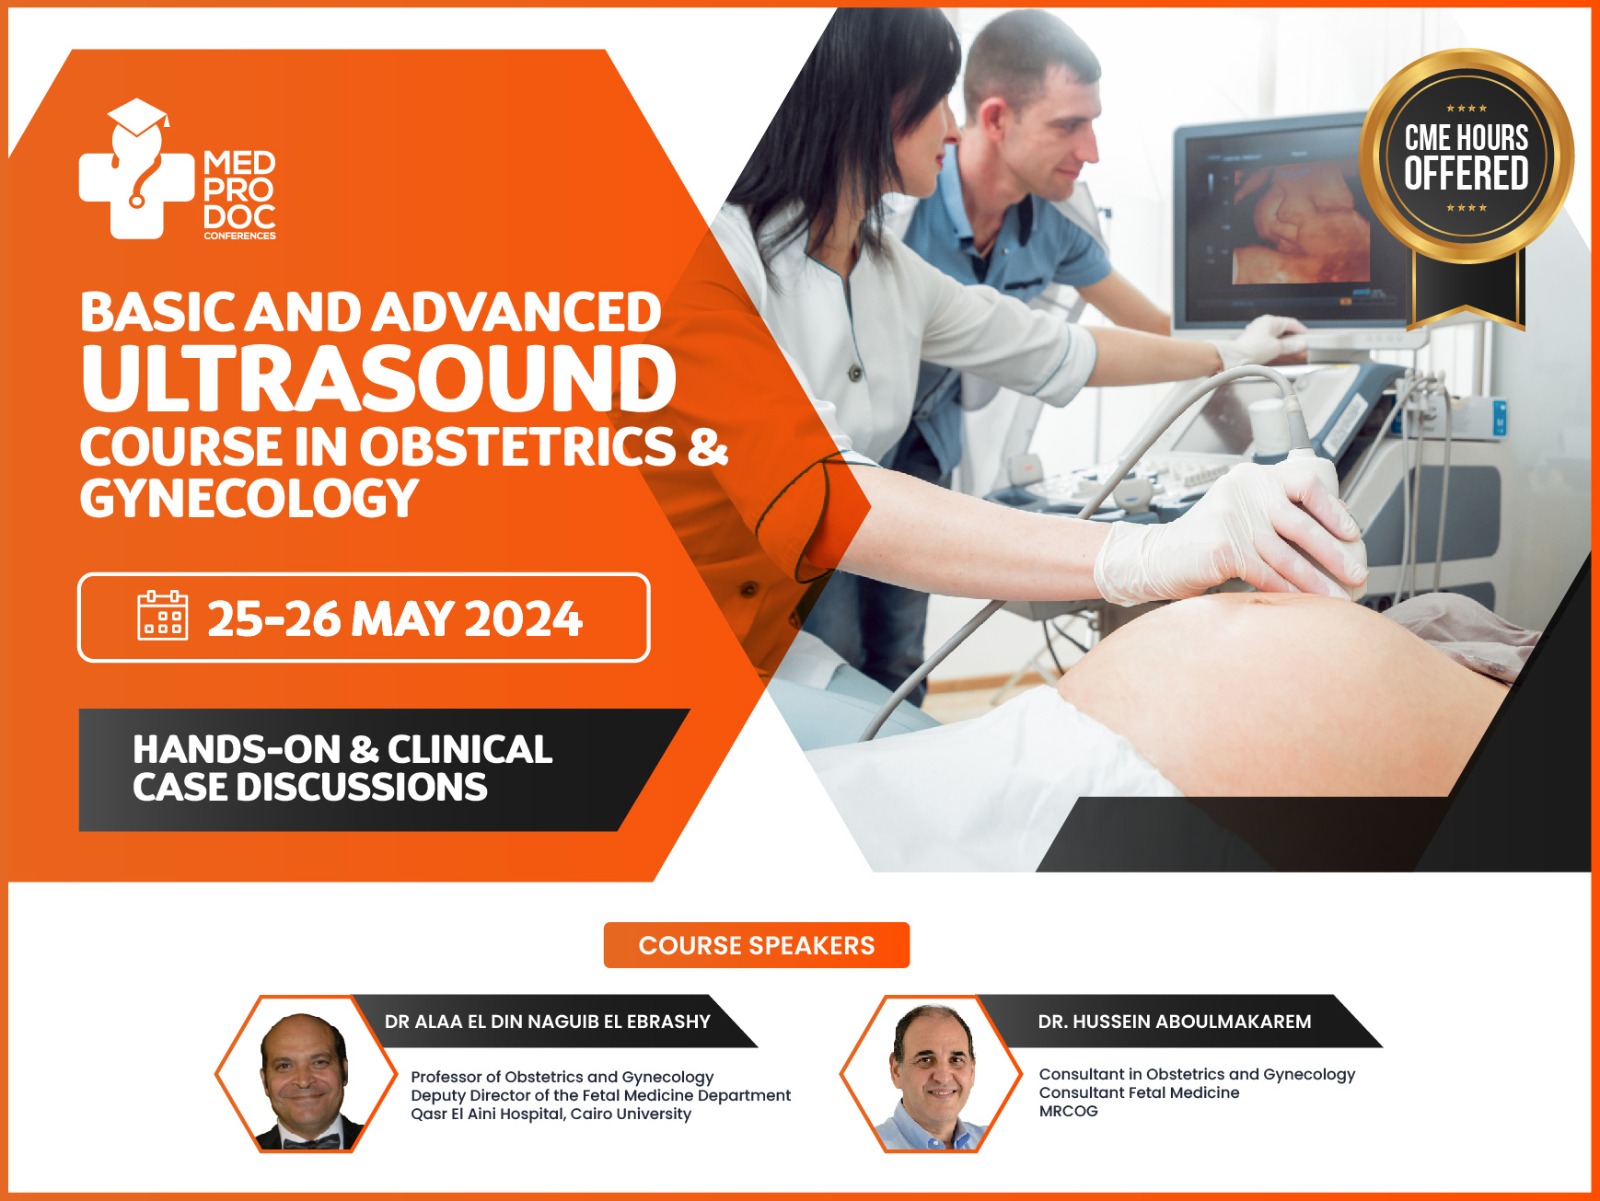 Basic and Advanced Ultrasound Course in Obstetrics & Gynecology